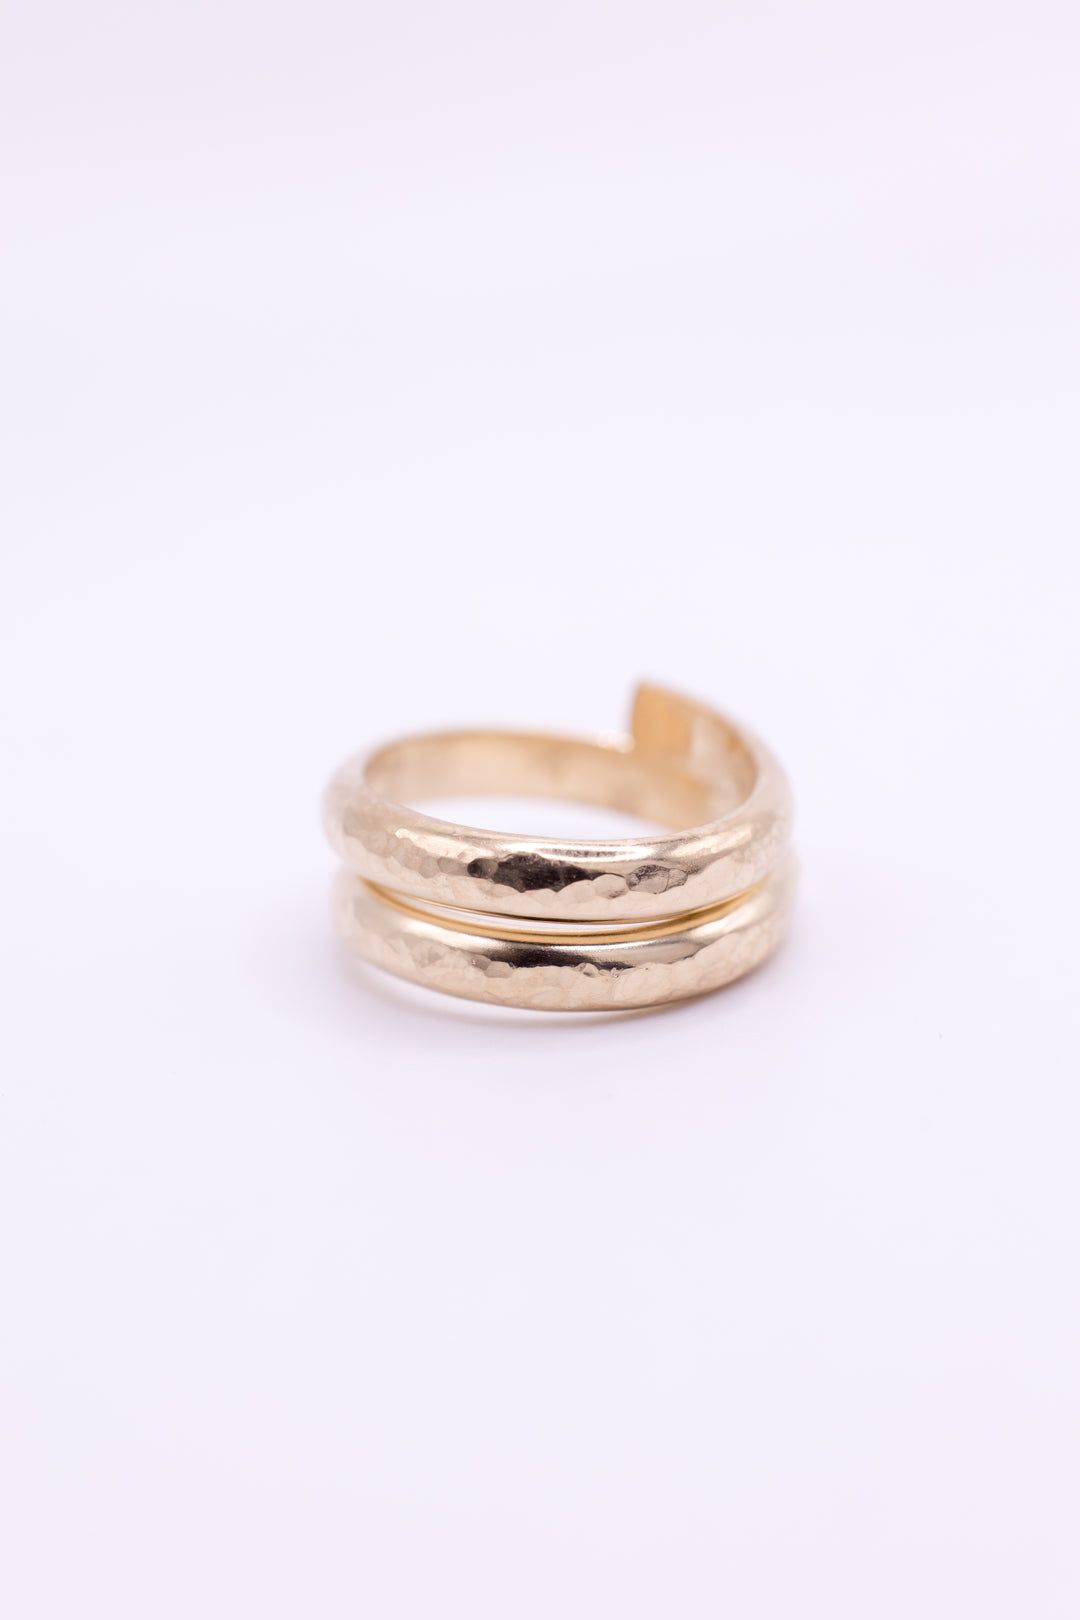 Hammered Ring by Anna Shae Jewelry in Lexington, Kentucky